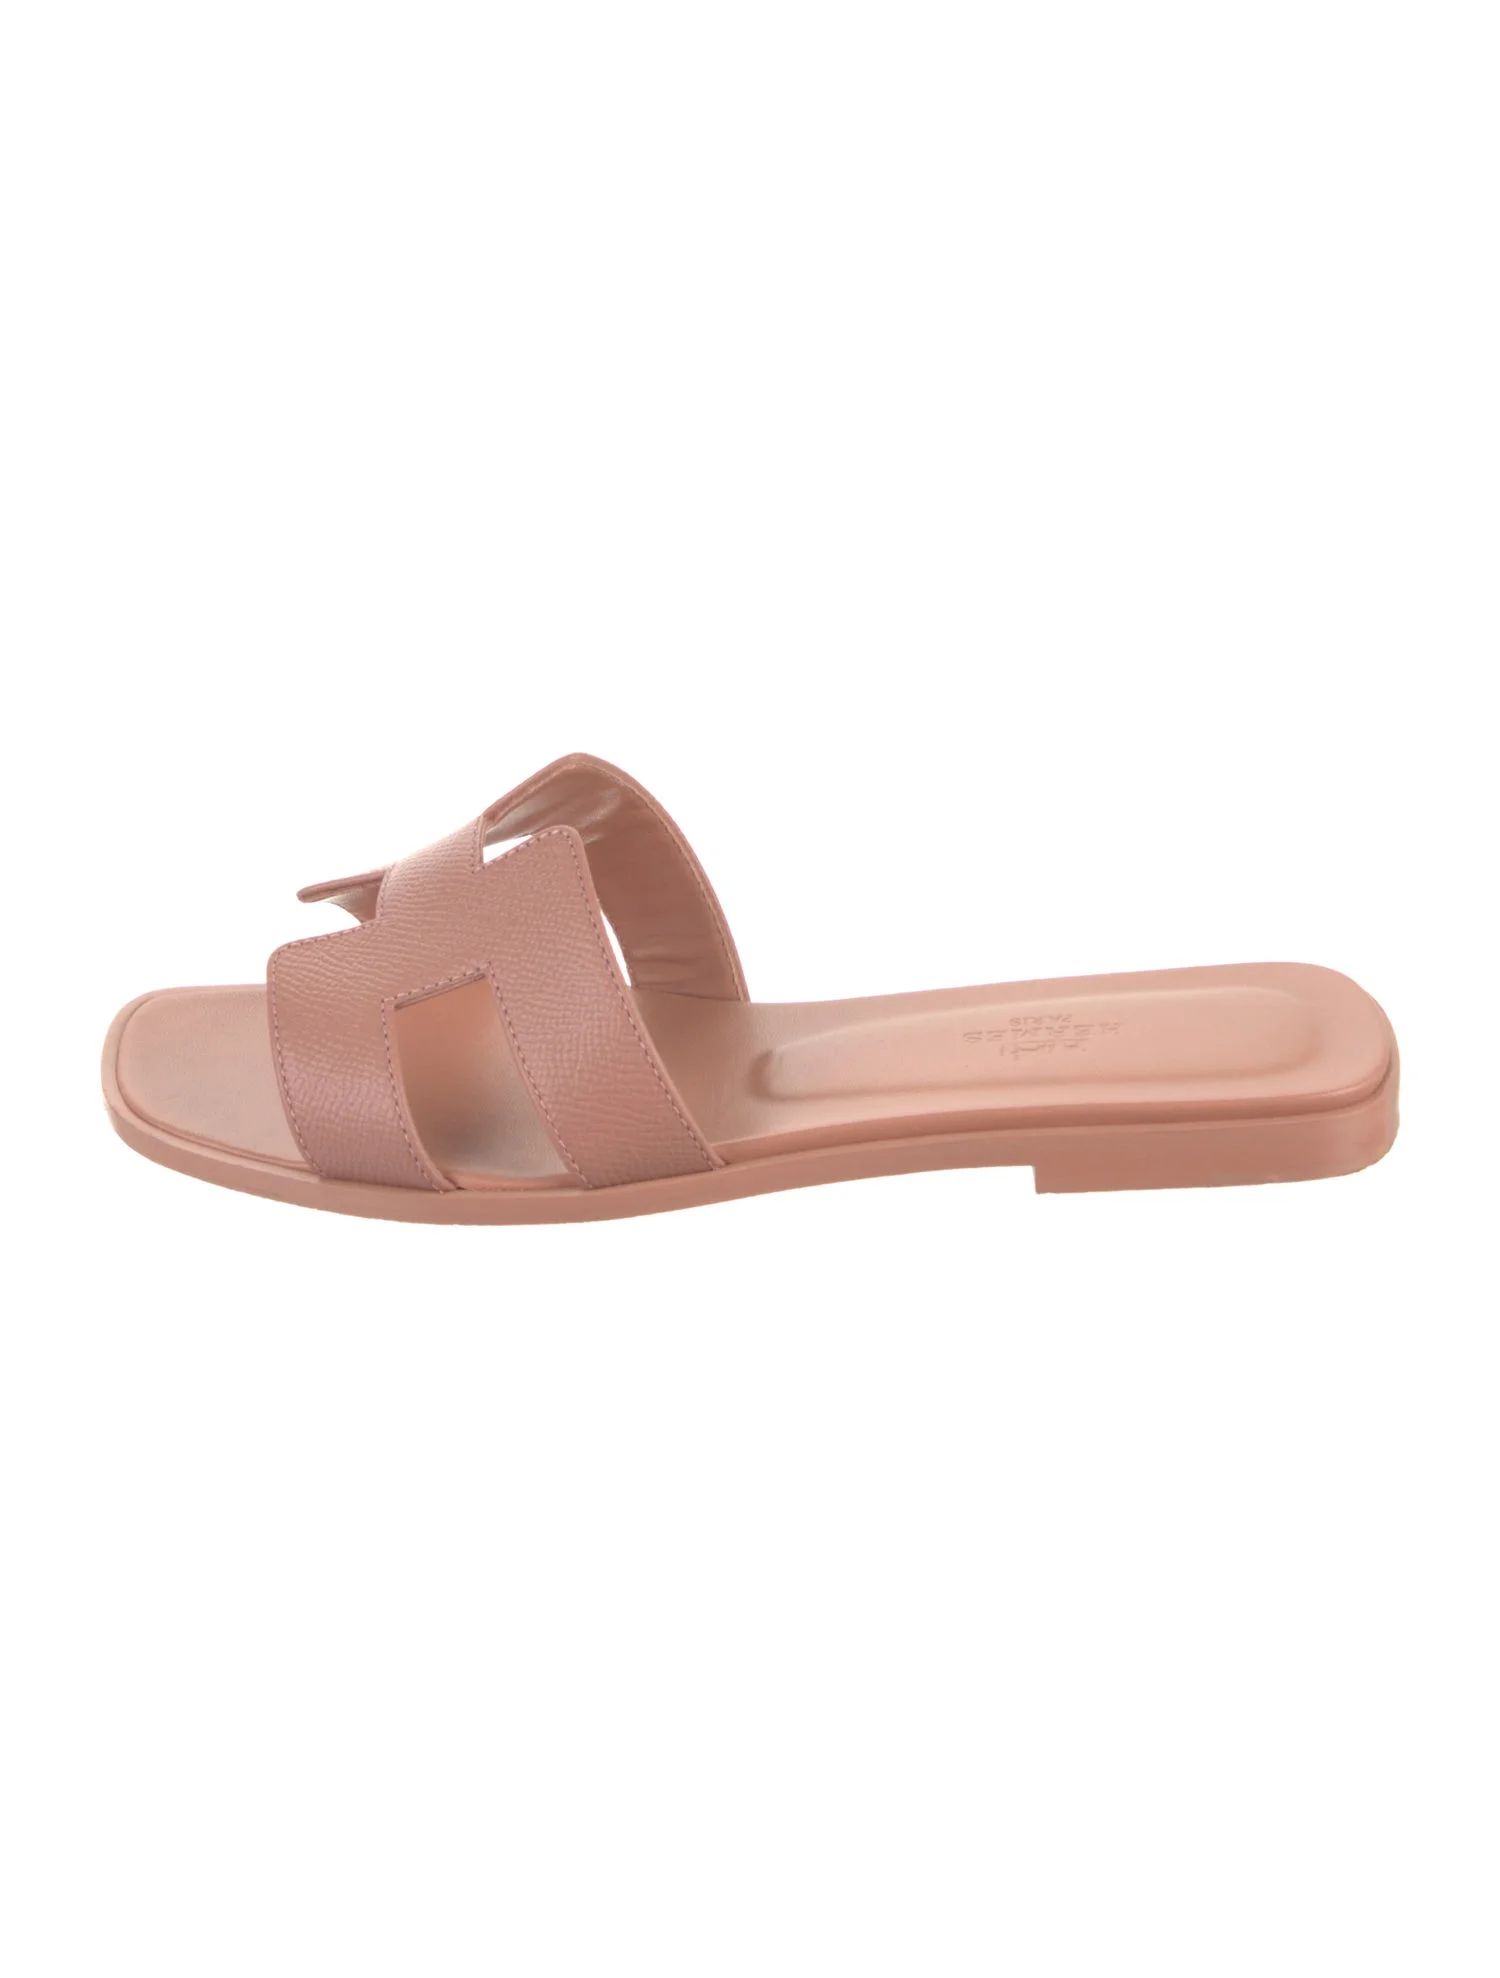 Hermès Leather Slides | The RealReal